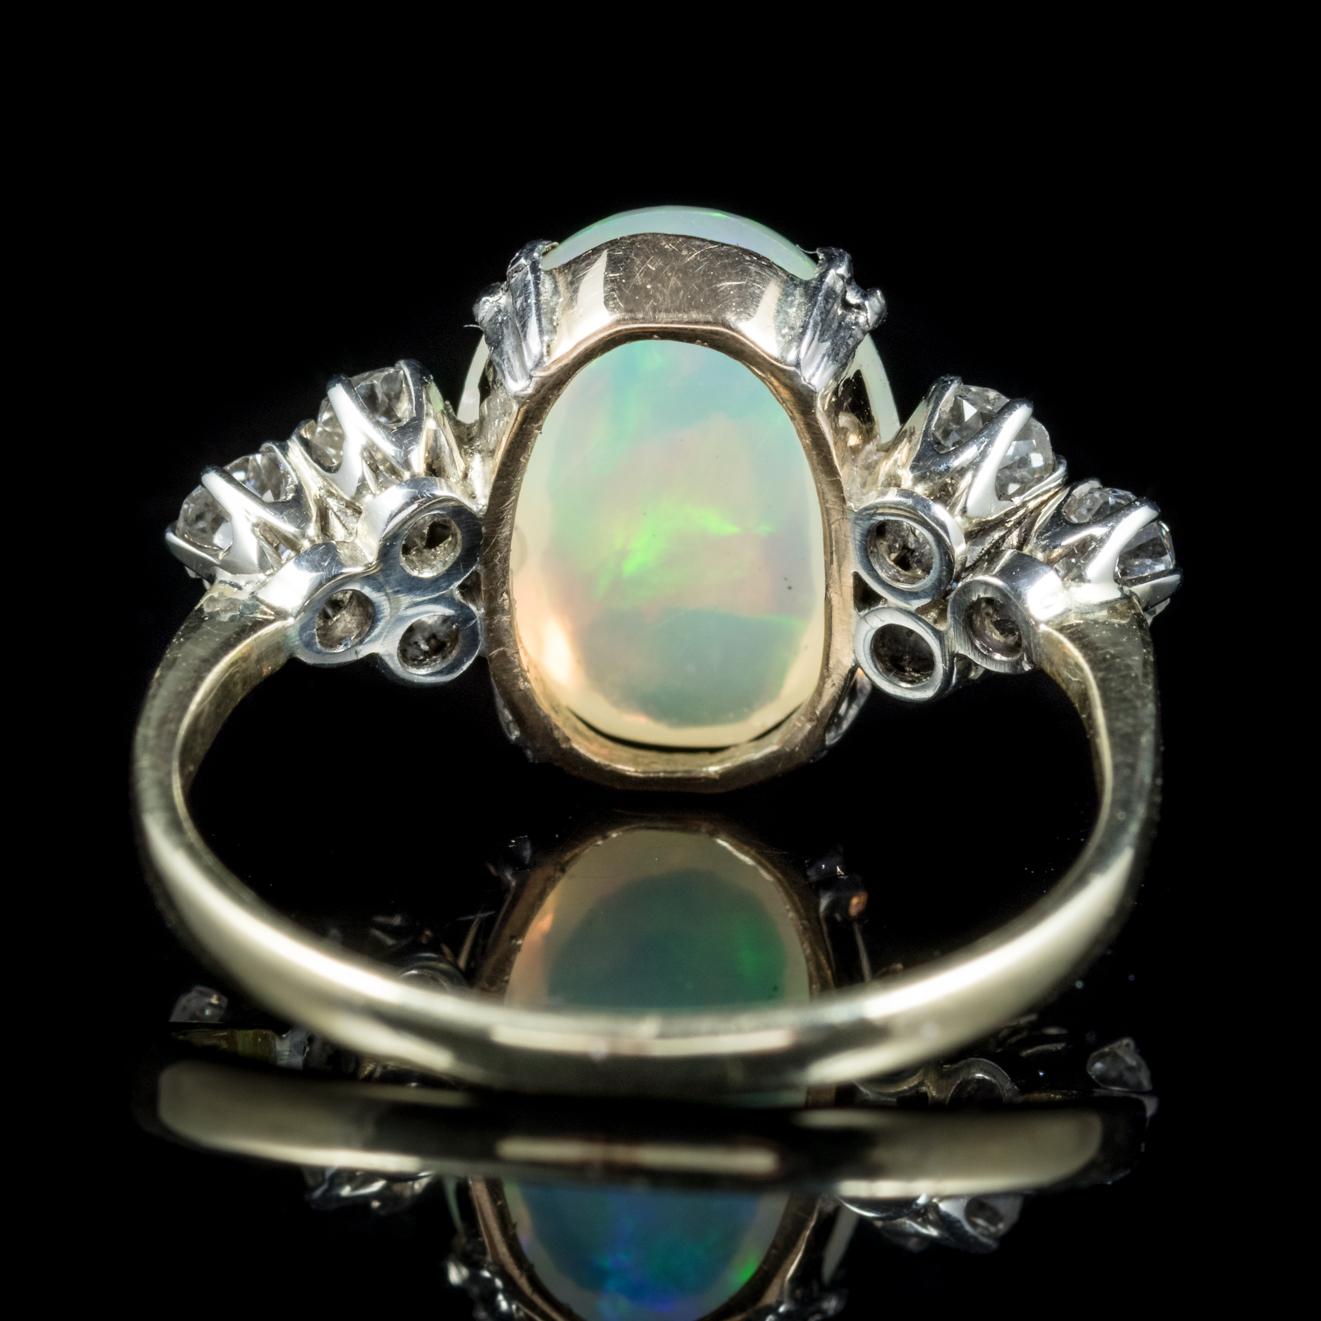 Antique Edwardian Opal Diamond Ring 18 Carat Gold, circa 1910 In Excellent Condition For Sale In Lancaster, Lancashire